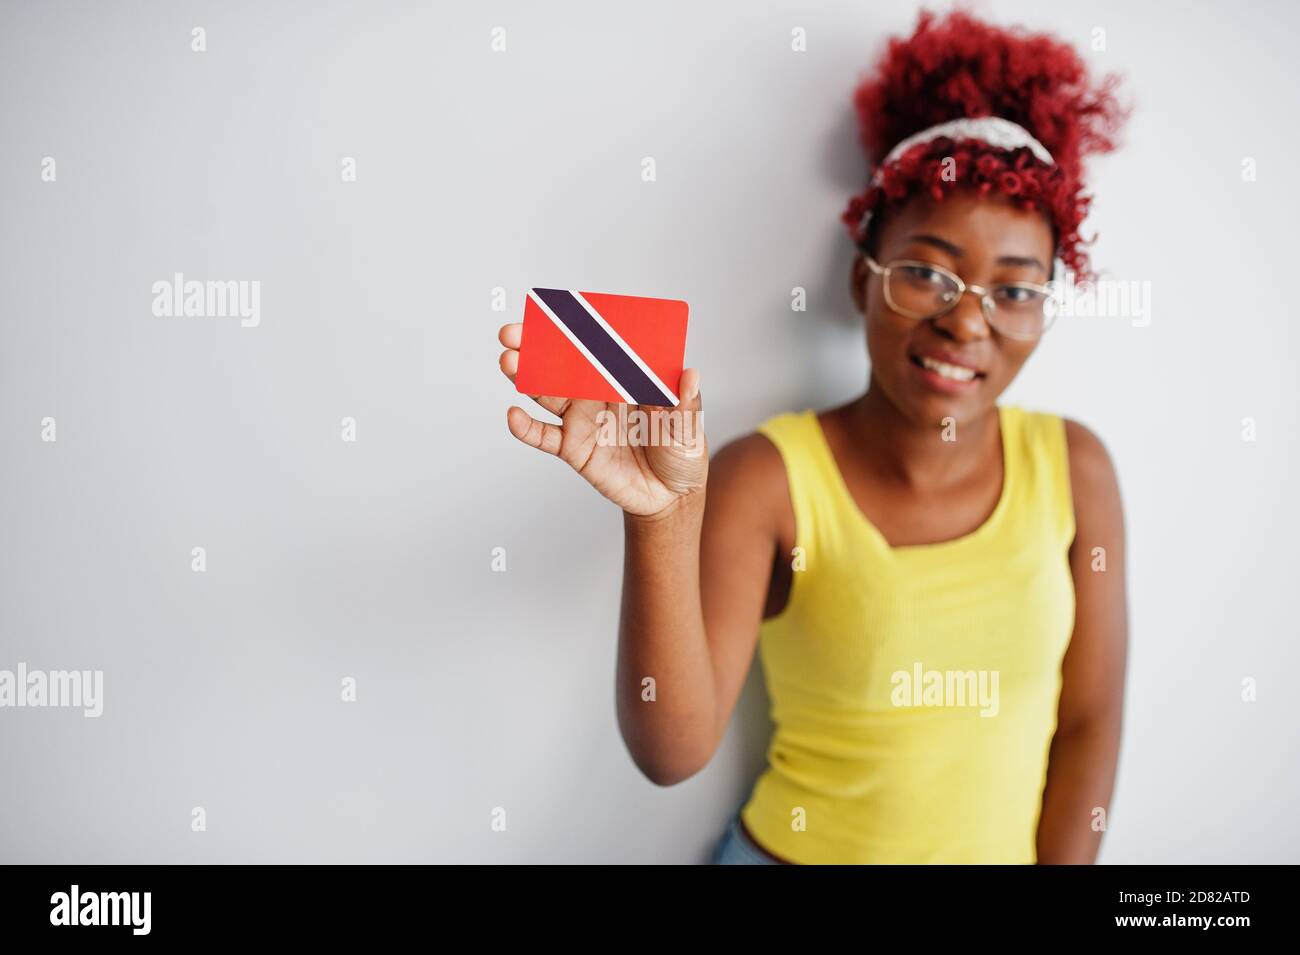 African american woman with afro hair, wear yellow singlet and eyeglasses, hold Trinidad and Tobago flag isolated on white background. Stock Photo